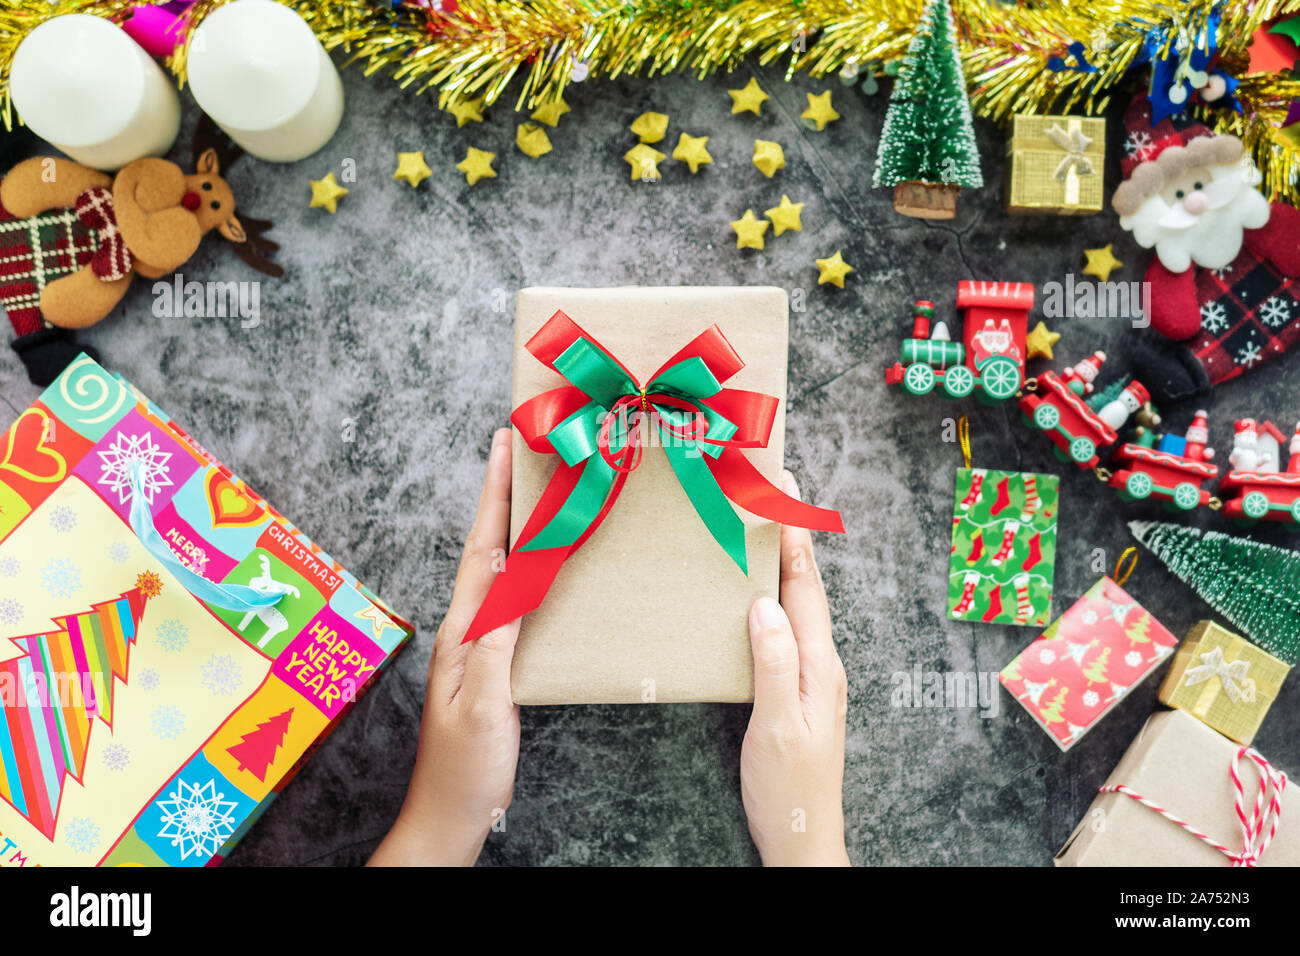 hand holding gift box from shopping bag during Christmas season and gift festival, decorations with Christmas ornament on table Stock Photo